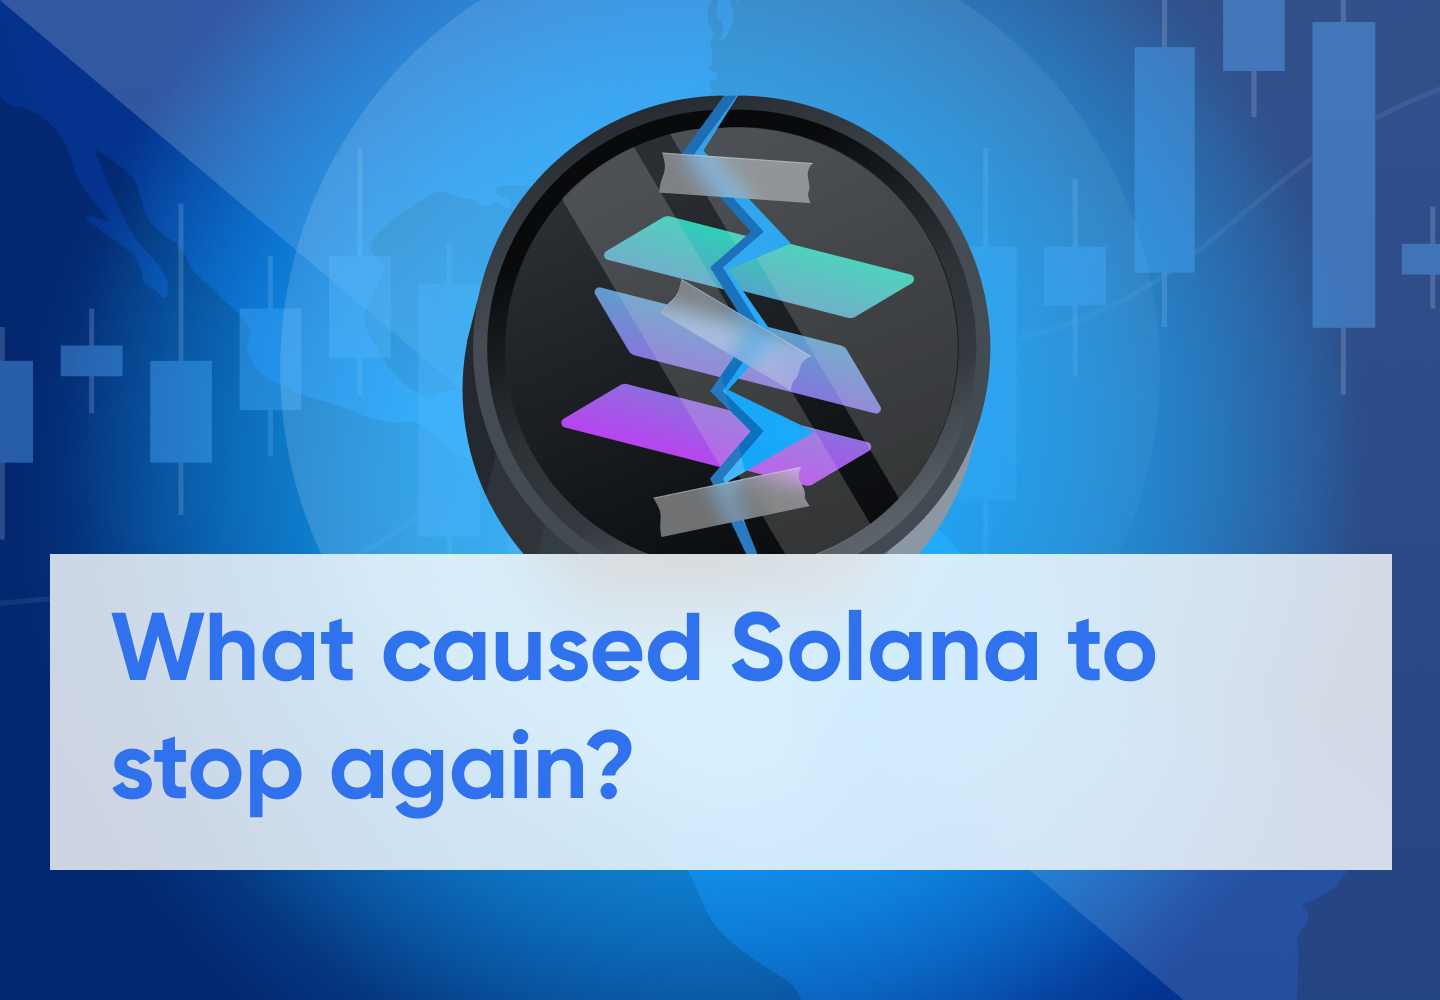 Solana has an Outage Again, Should We Be Concerned?